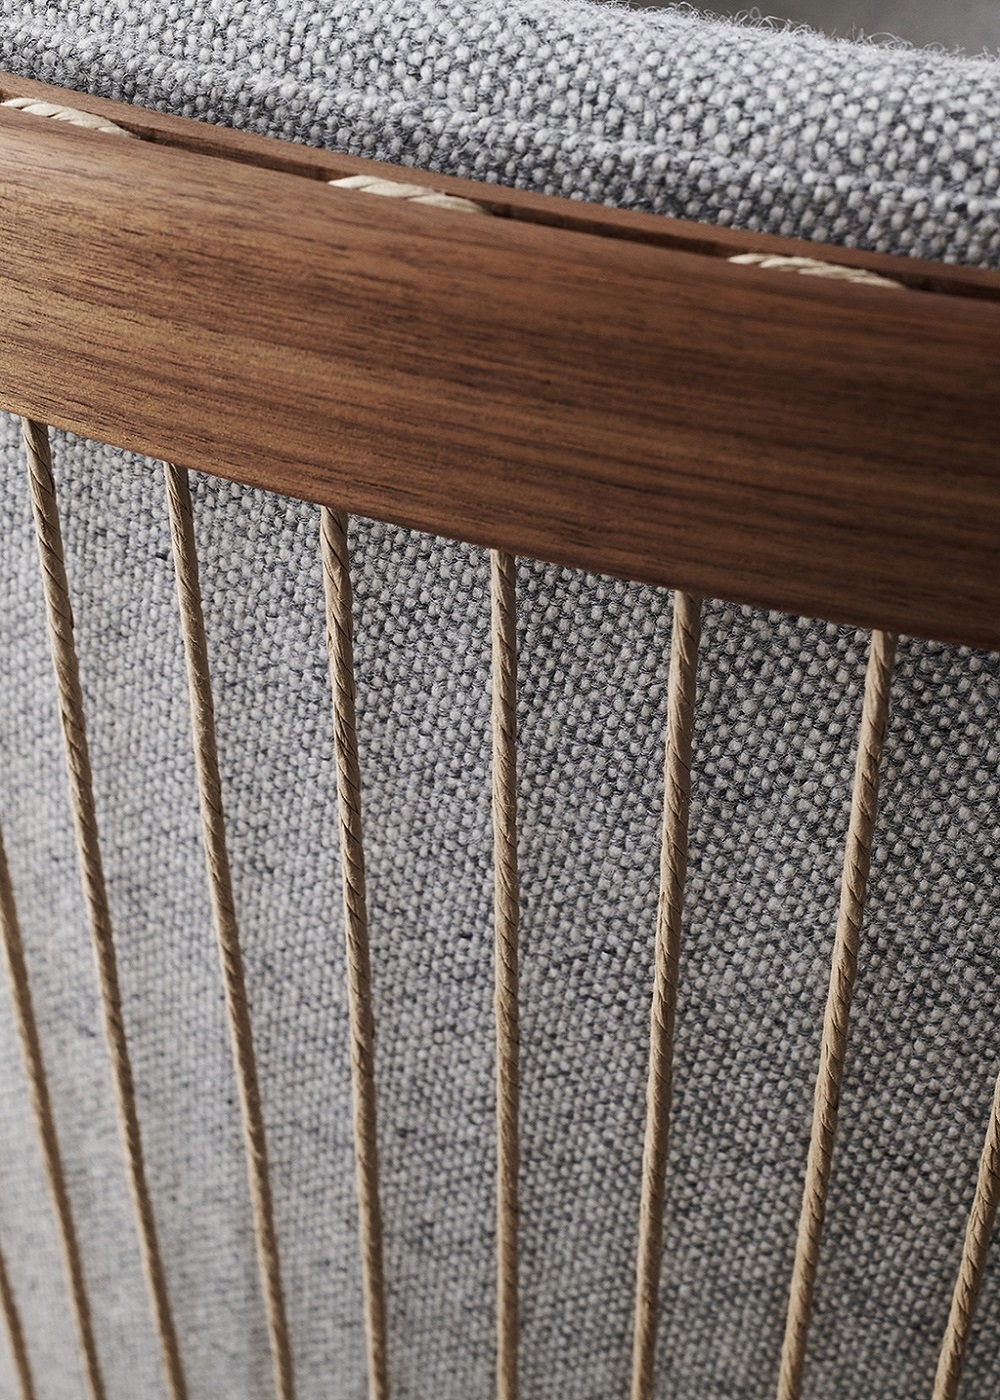 wooden and cord detail of the side sofa by Carl Hanson & son